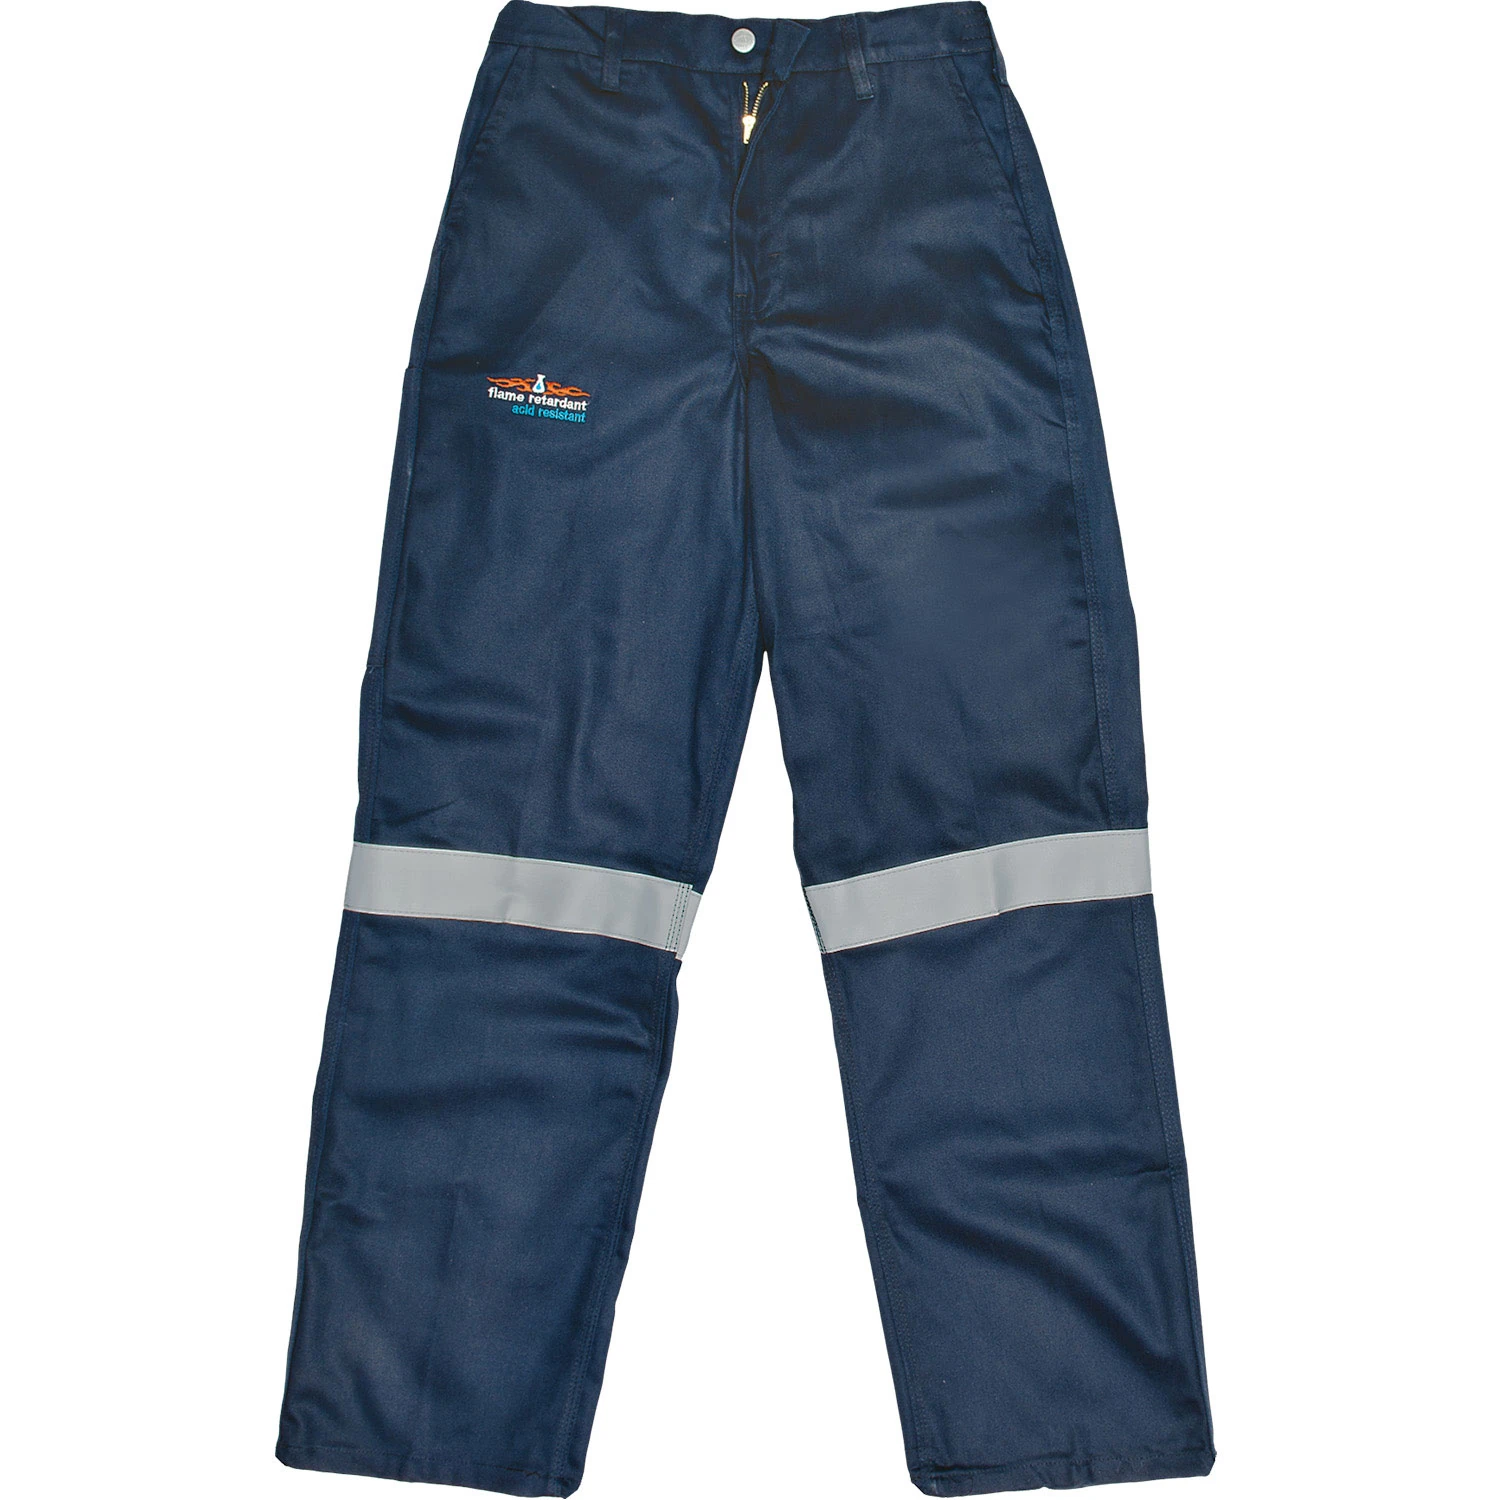 D59 Flame Retardant & Acid Resist Trouser with Reflective Tape Size 24